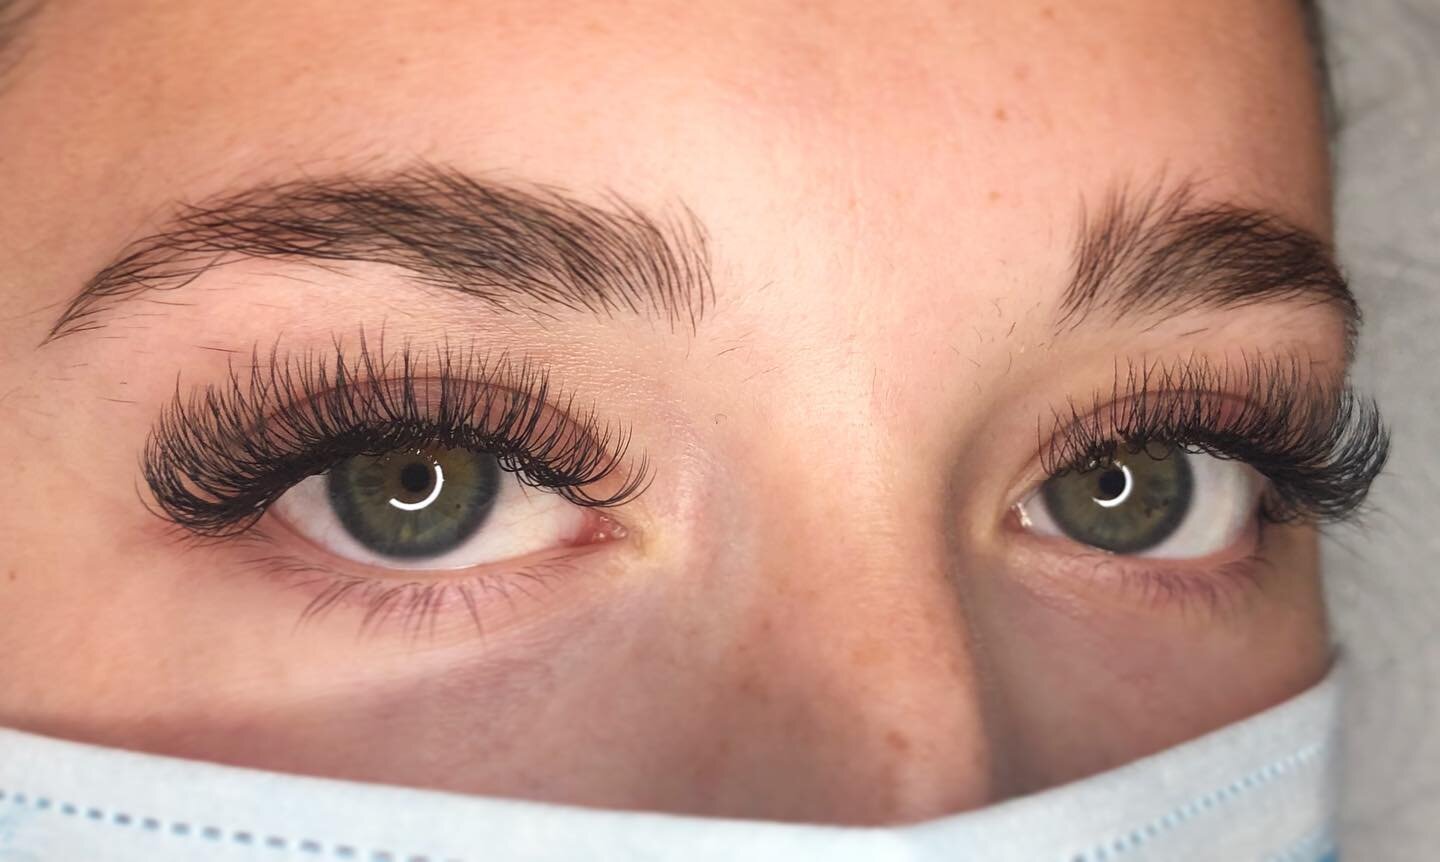 Hybrids are probably the most popular lashes I do! What&rsquo;s your favourite?? 
.
.
.

To Get Lashed:

via my Instagram &ldquo;Book&rdquo; button 

Come in and have a full consultation to discuss what, length, thickness and style will best suit you